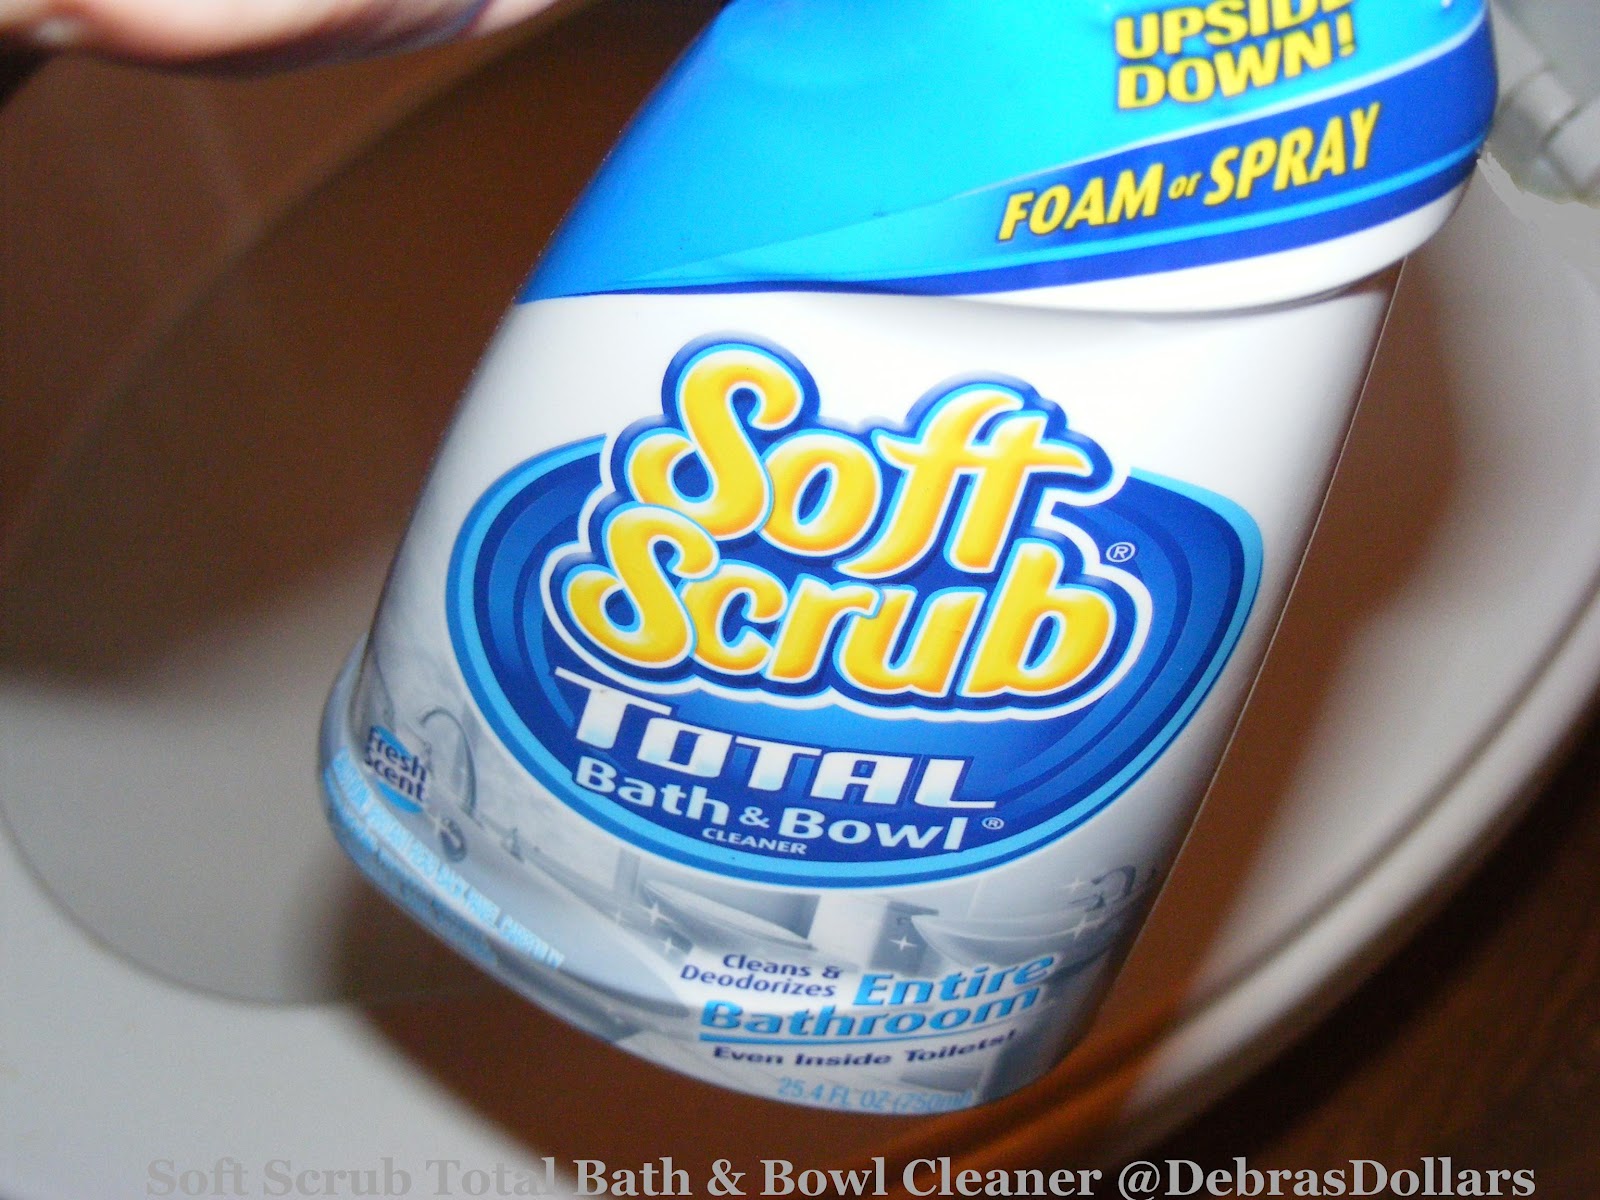 Debras Dollars It Just Makes Cents Soft Scrub Total Review